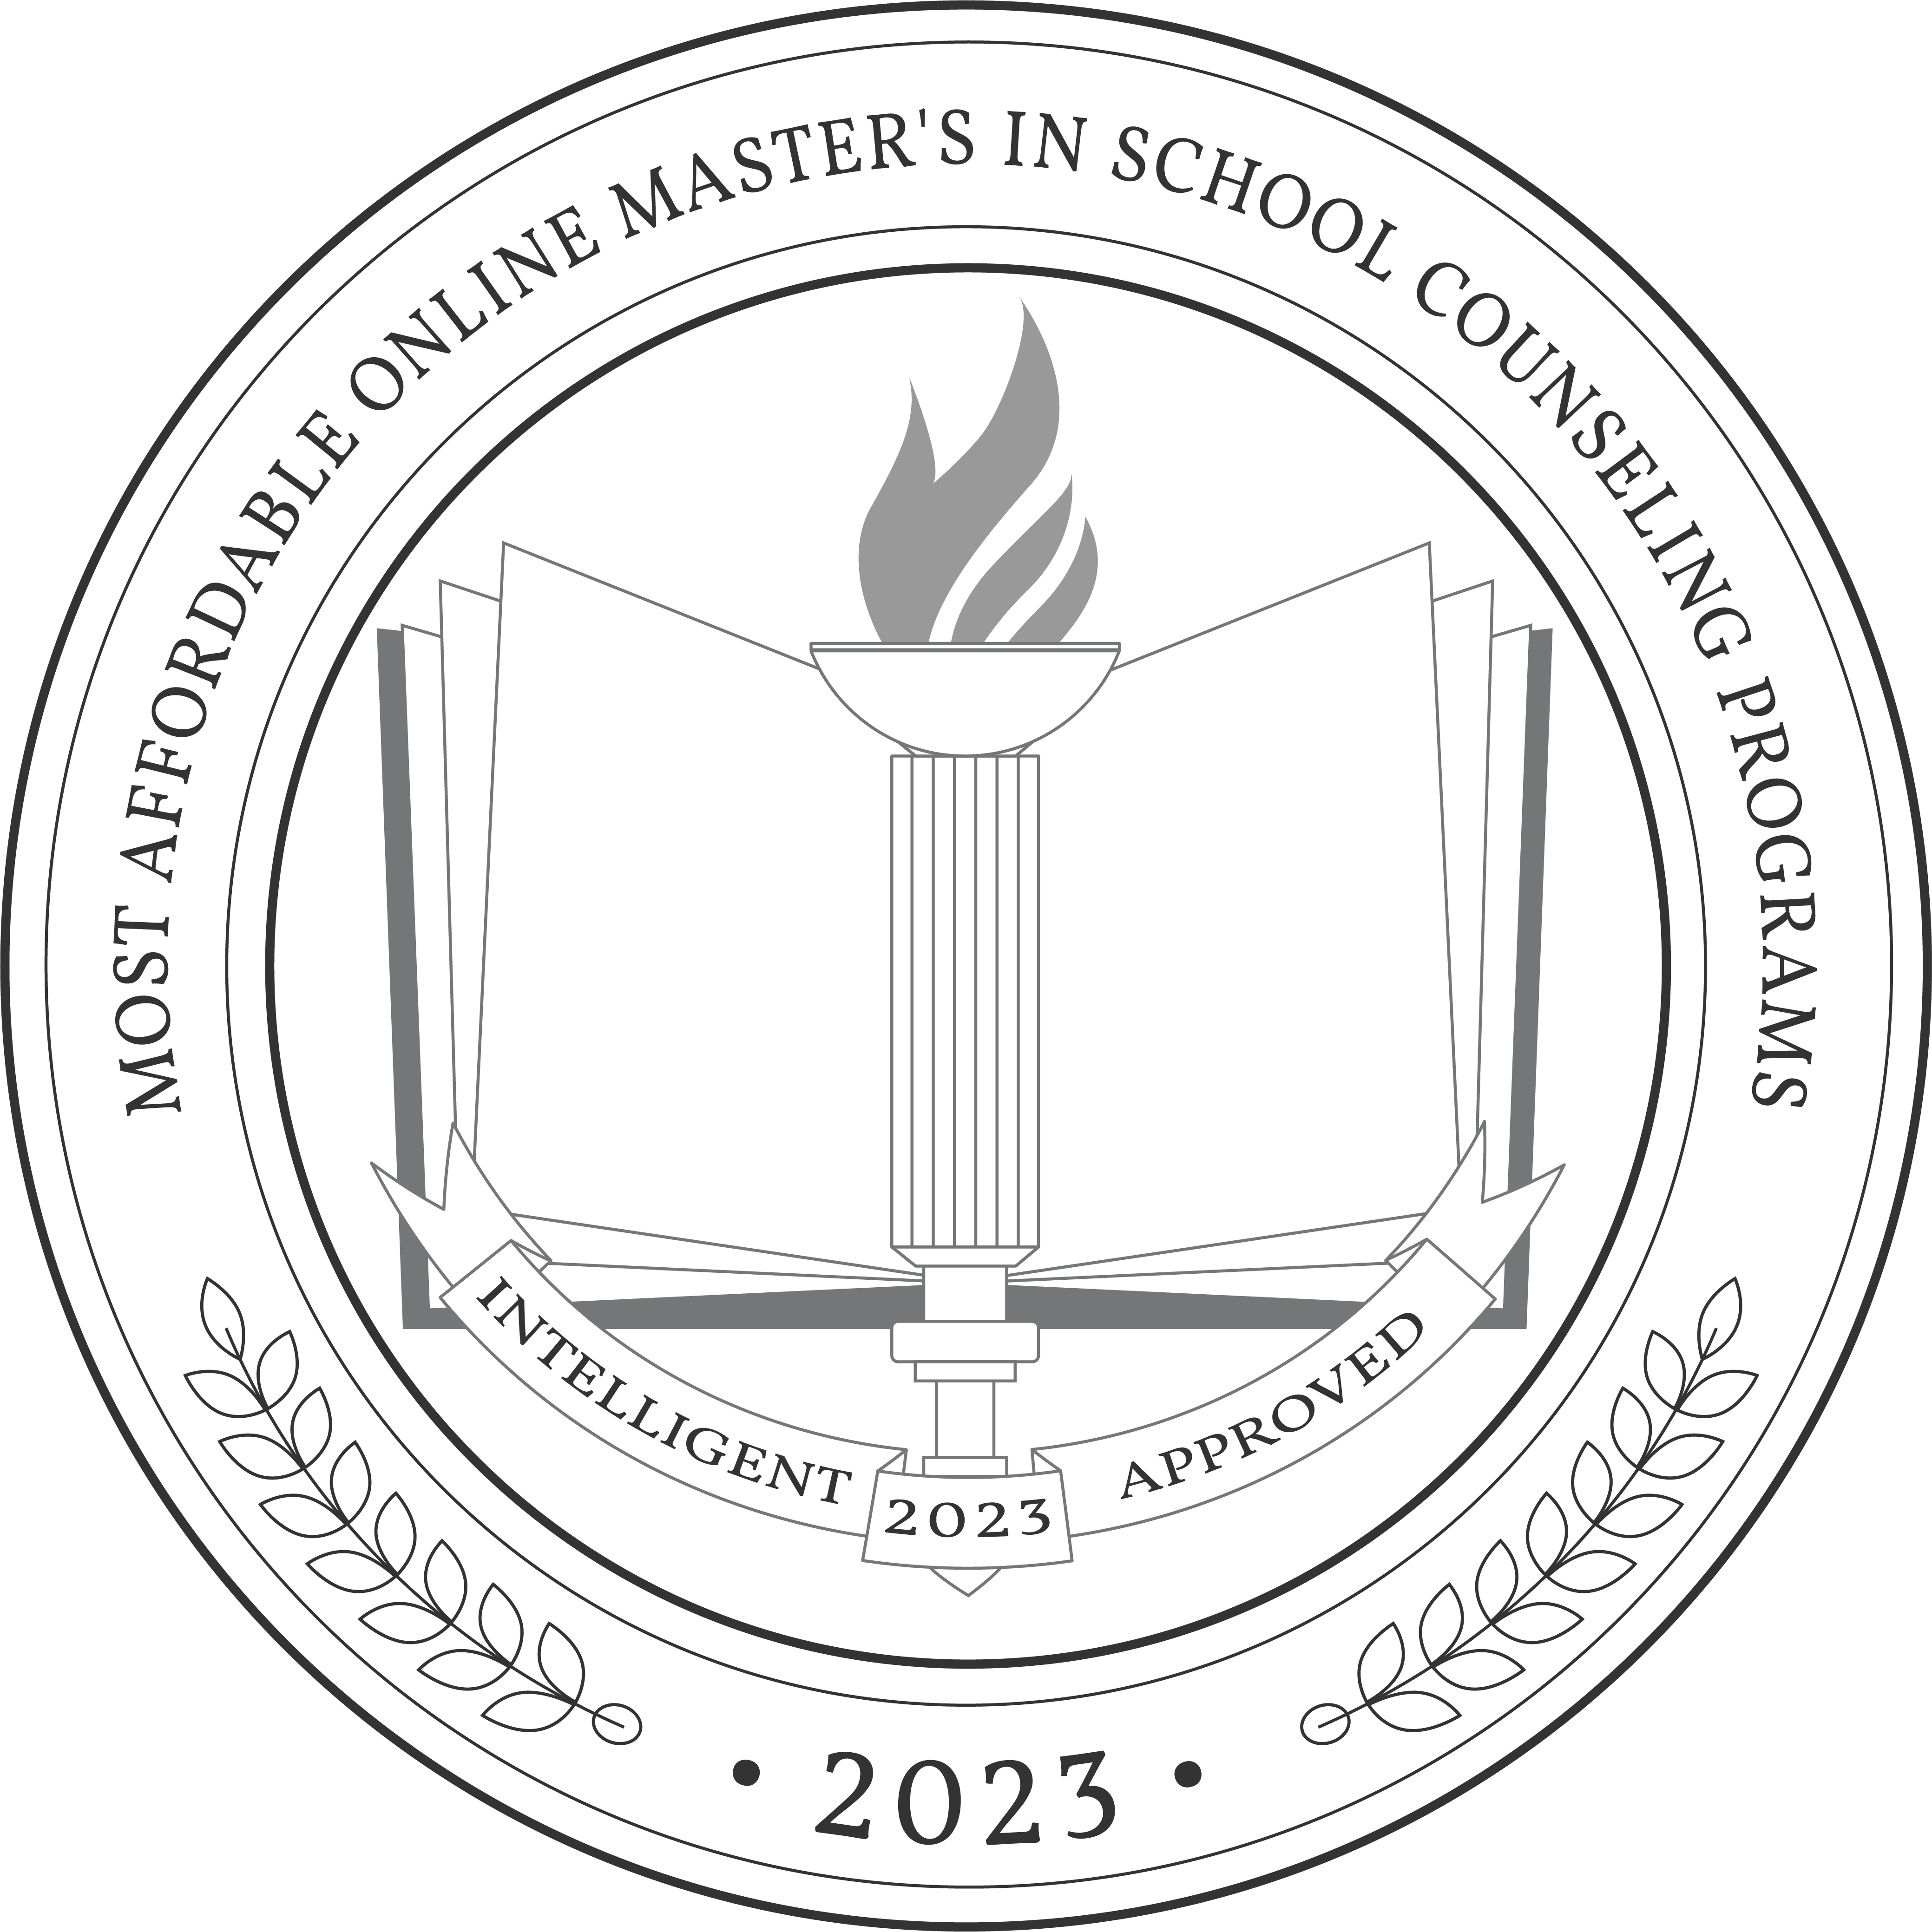 Most Affordable Online Master's in School Counseling Programs badge